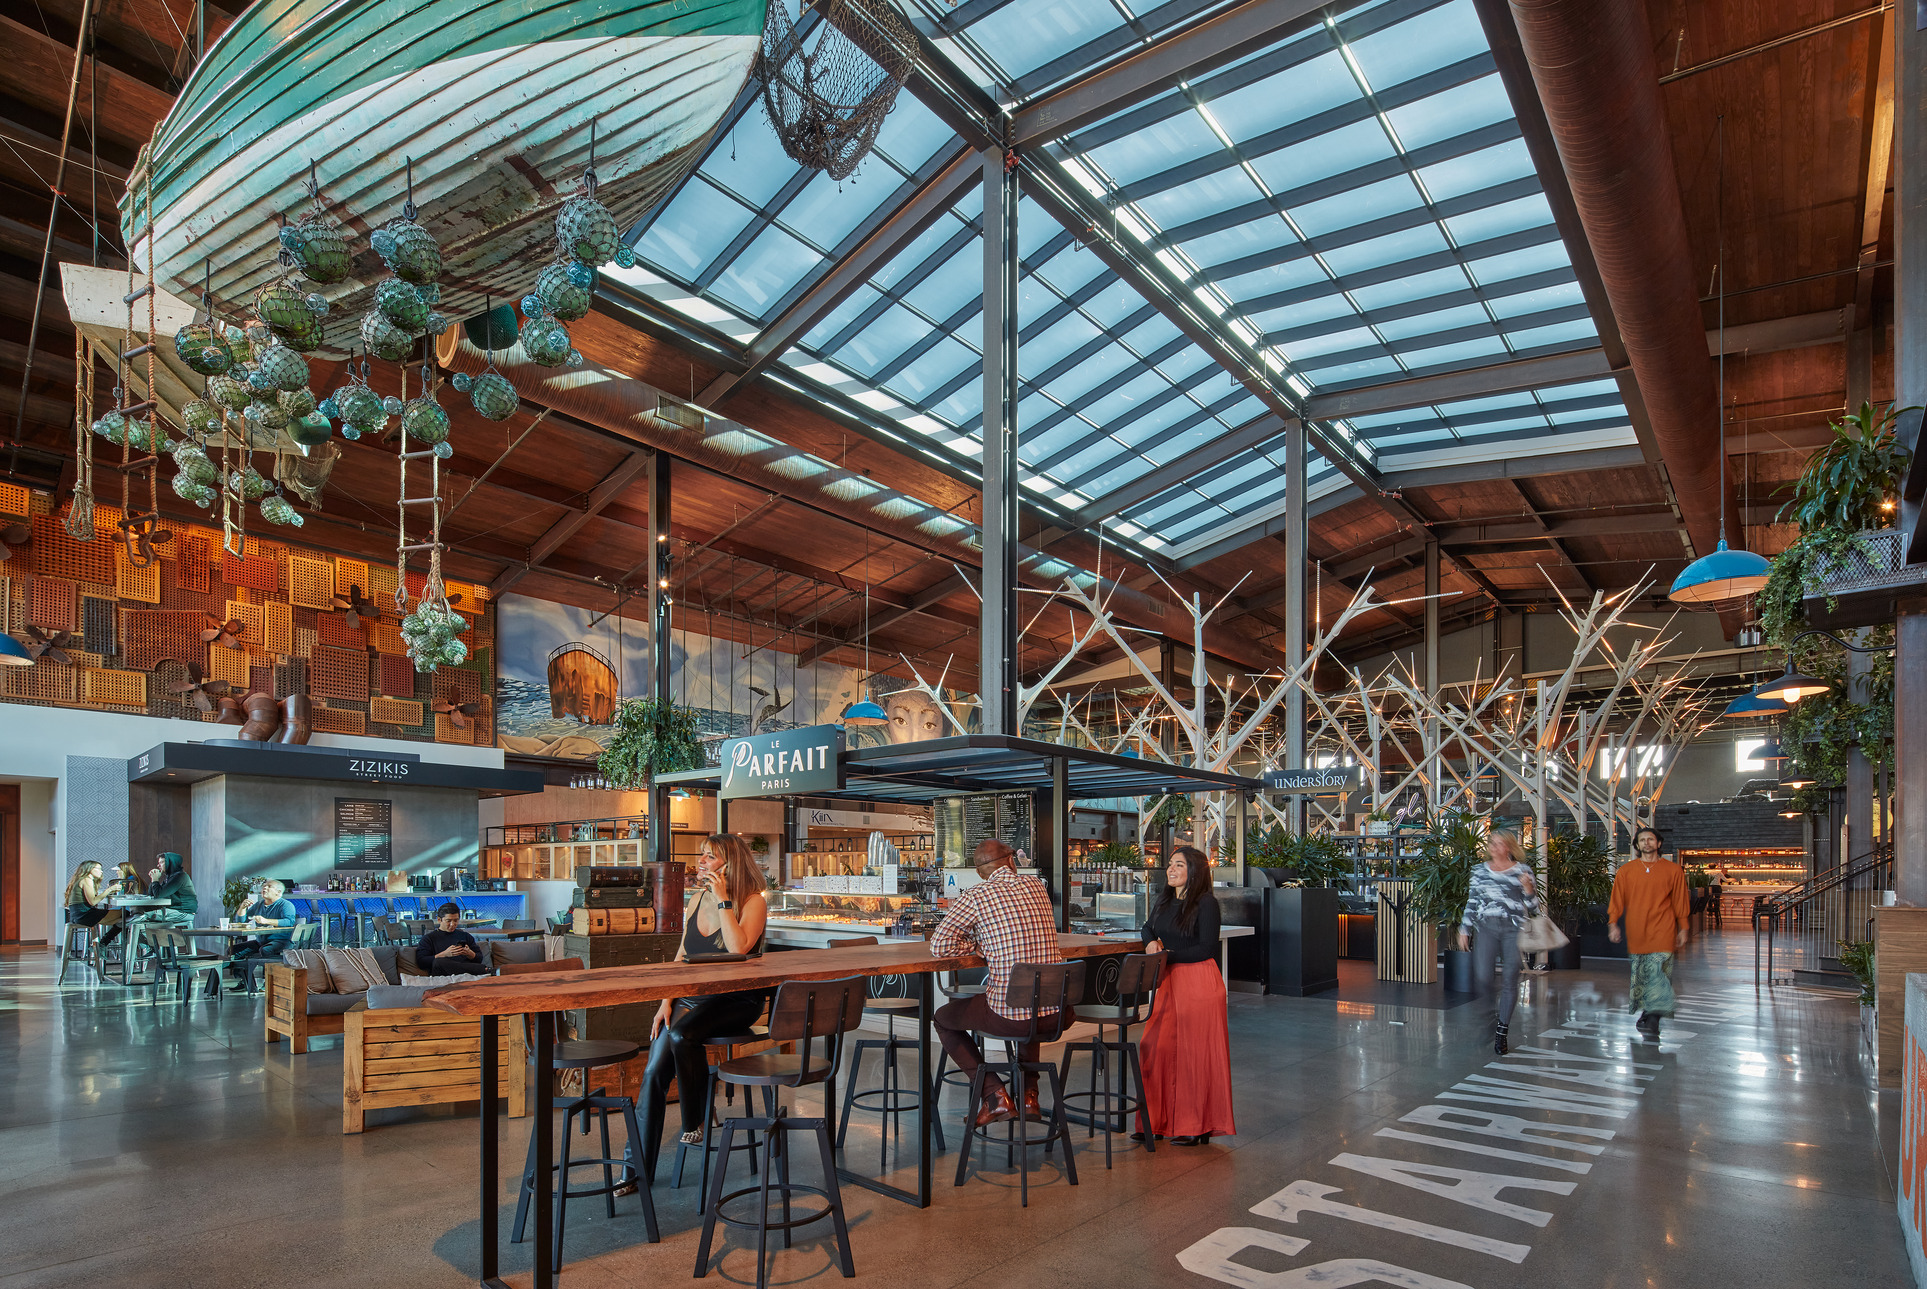 Sky Deck Named One of Fodor’s Best New Food Halls in the United States